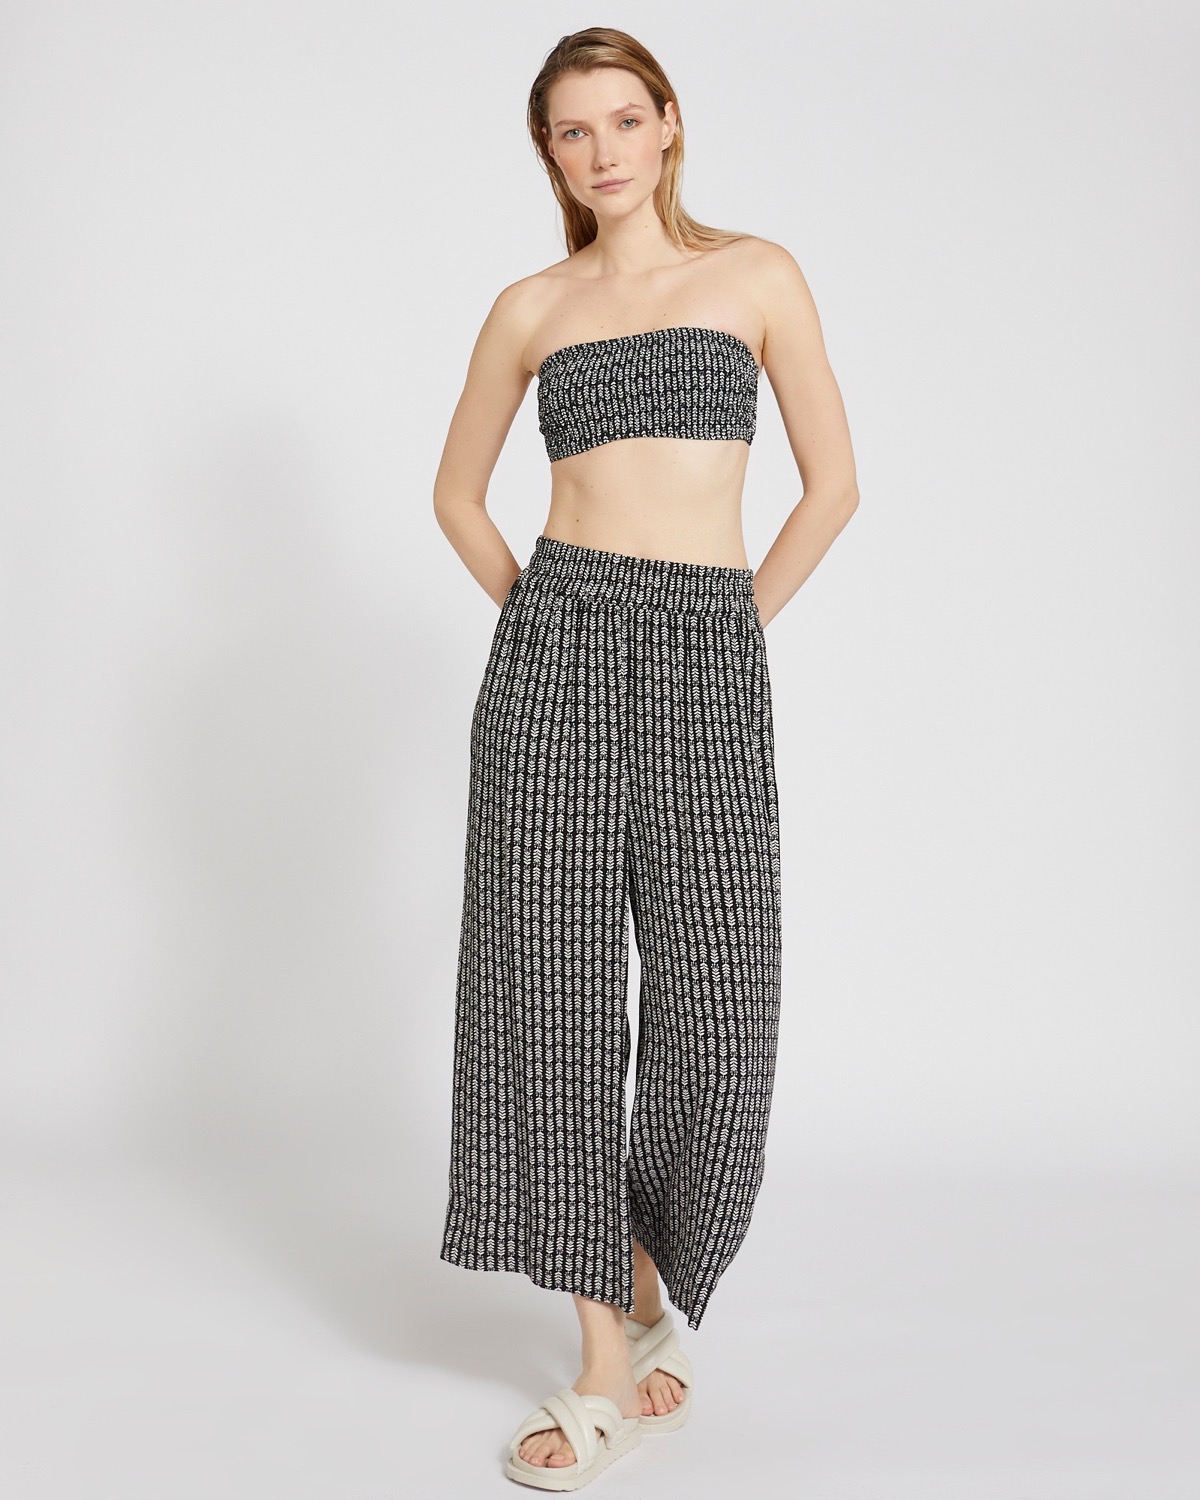 Dunnes Stores  Black Carolyn Donnelly The Edit Elastic Waist